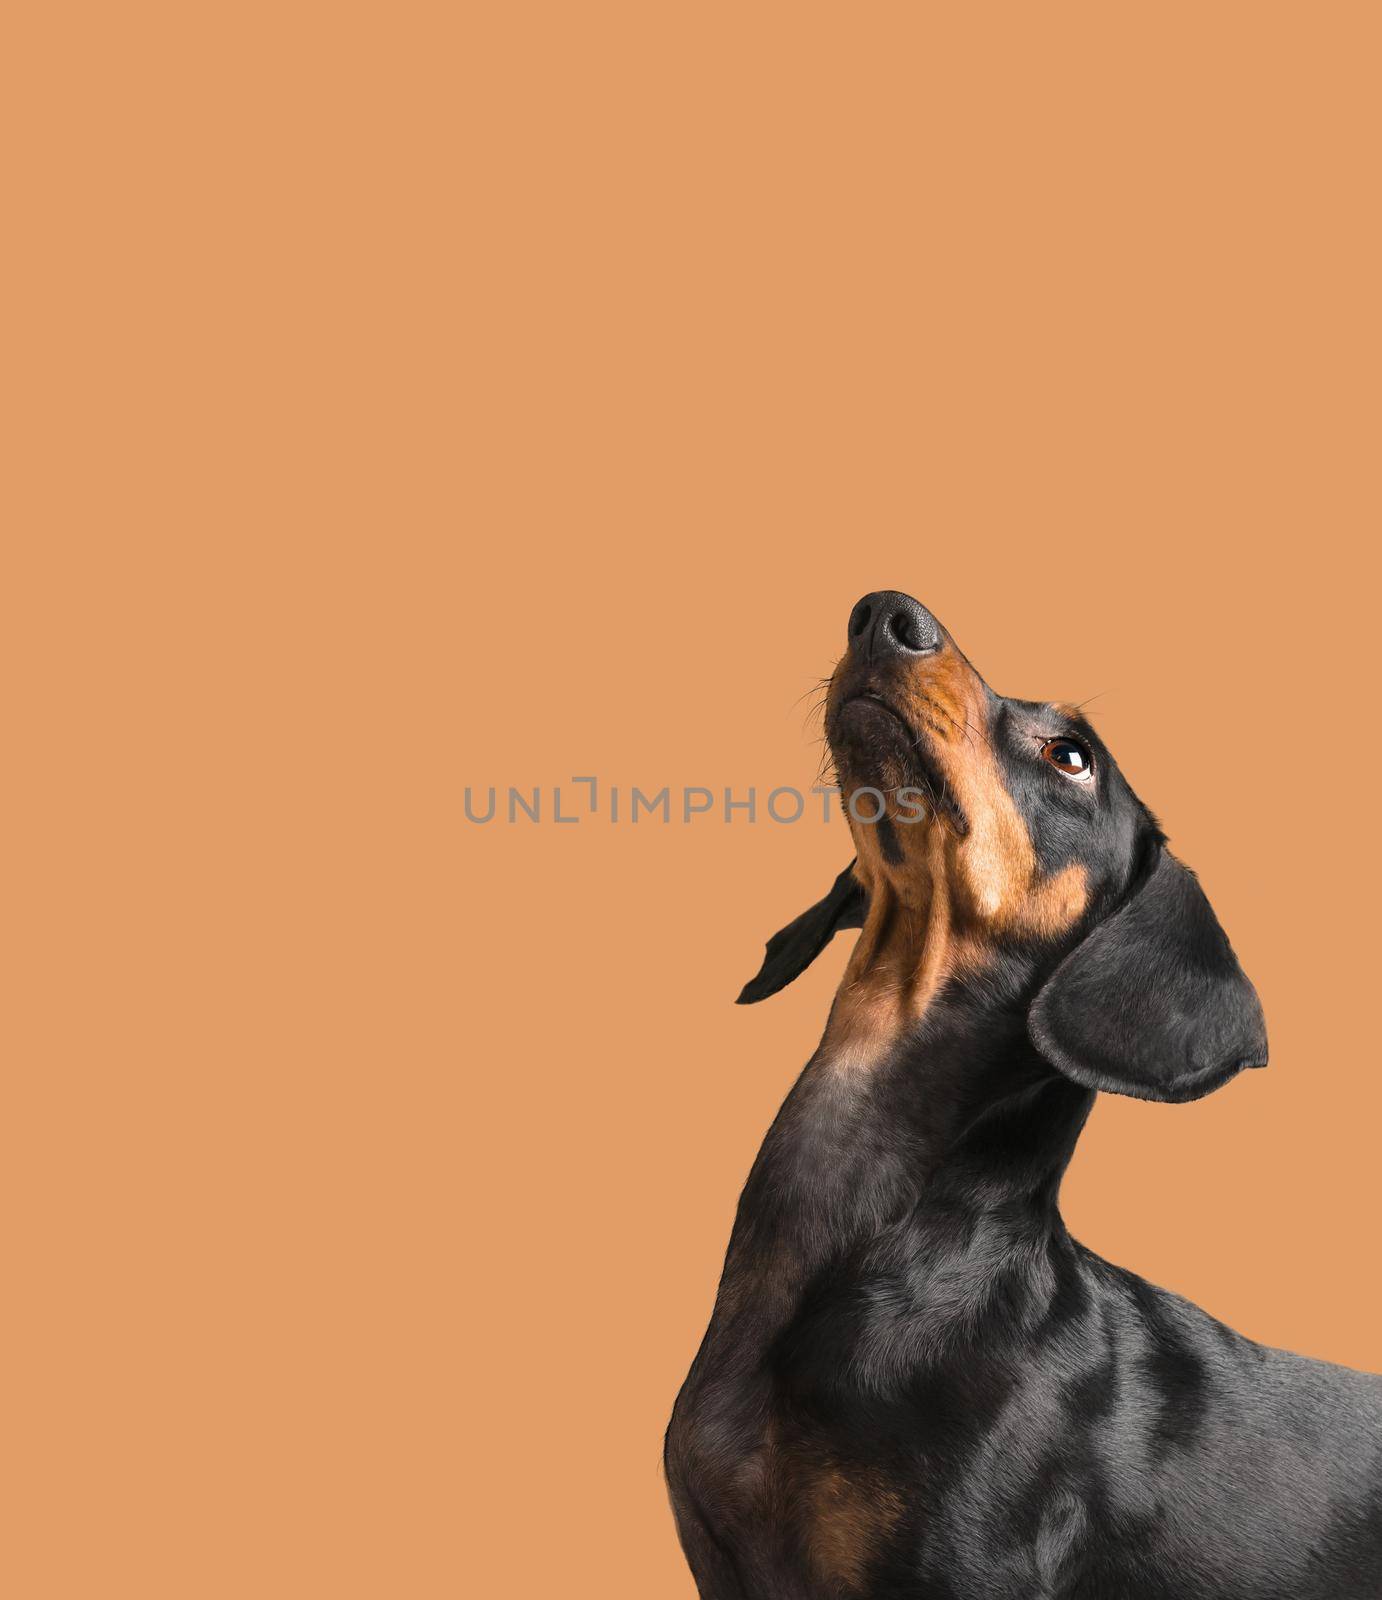 Cute dog dachshund looking up on orange background. Space for text in the upper part of image